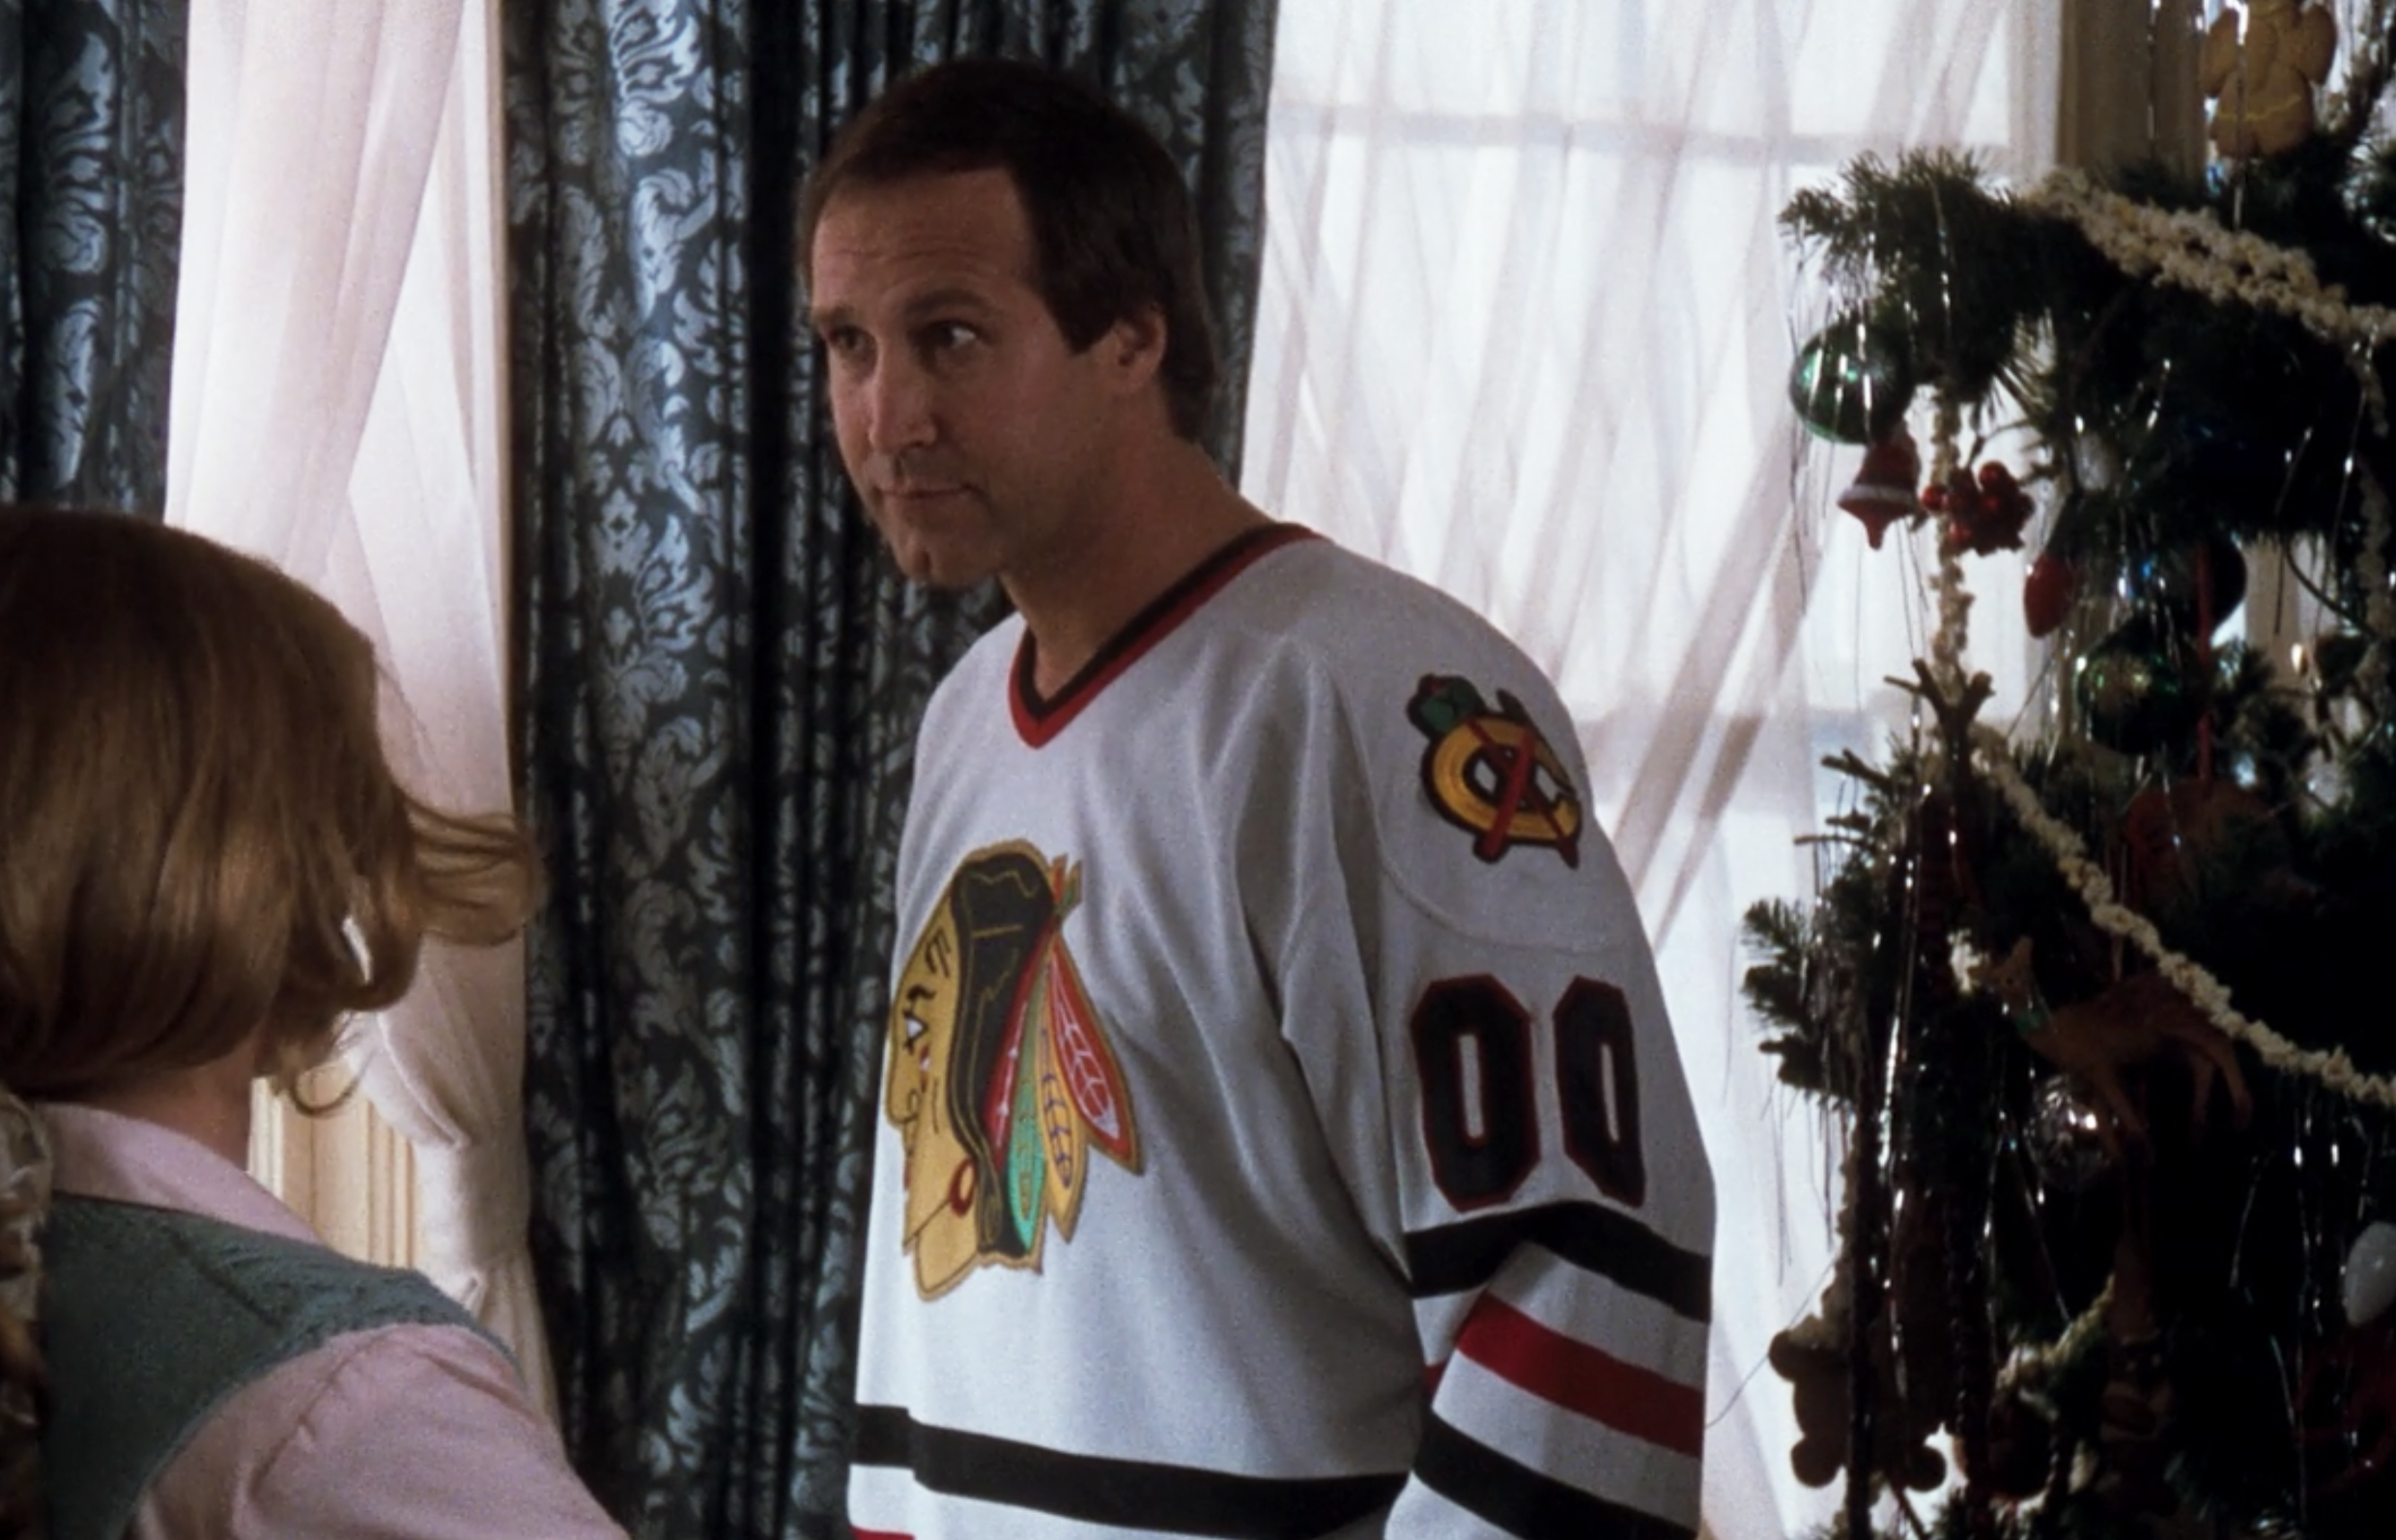 National Lampoon's Christmas Vacation: Chicago Blackhawks – T